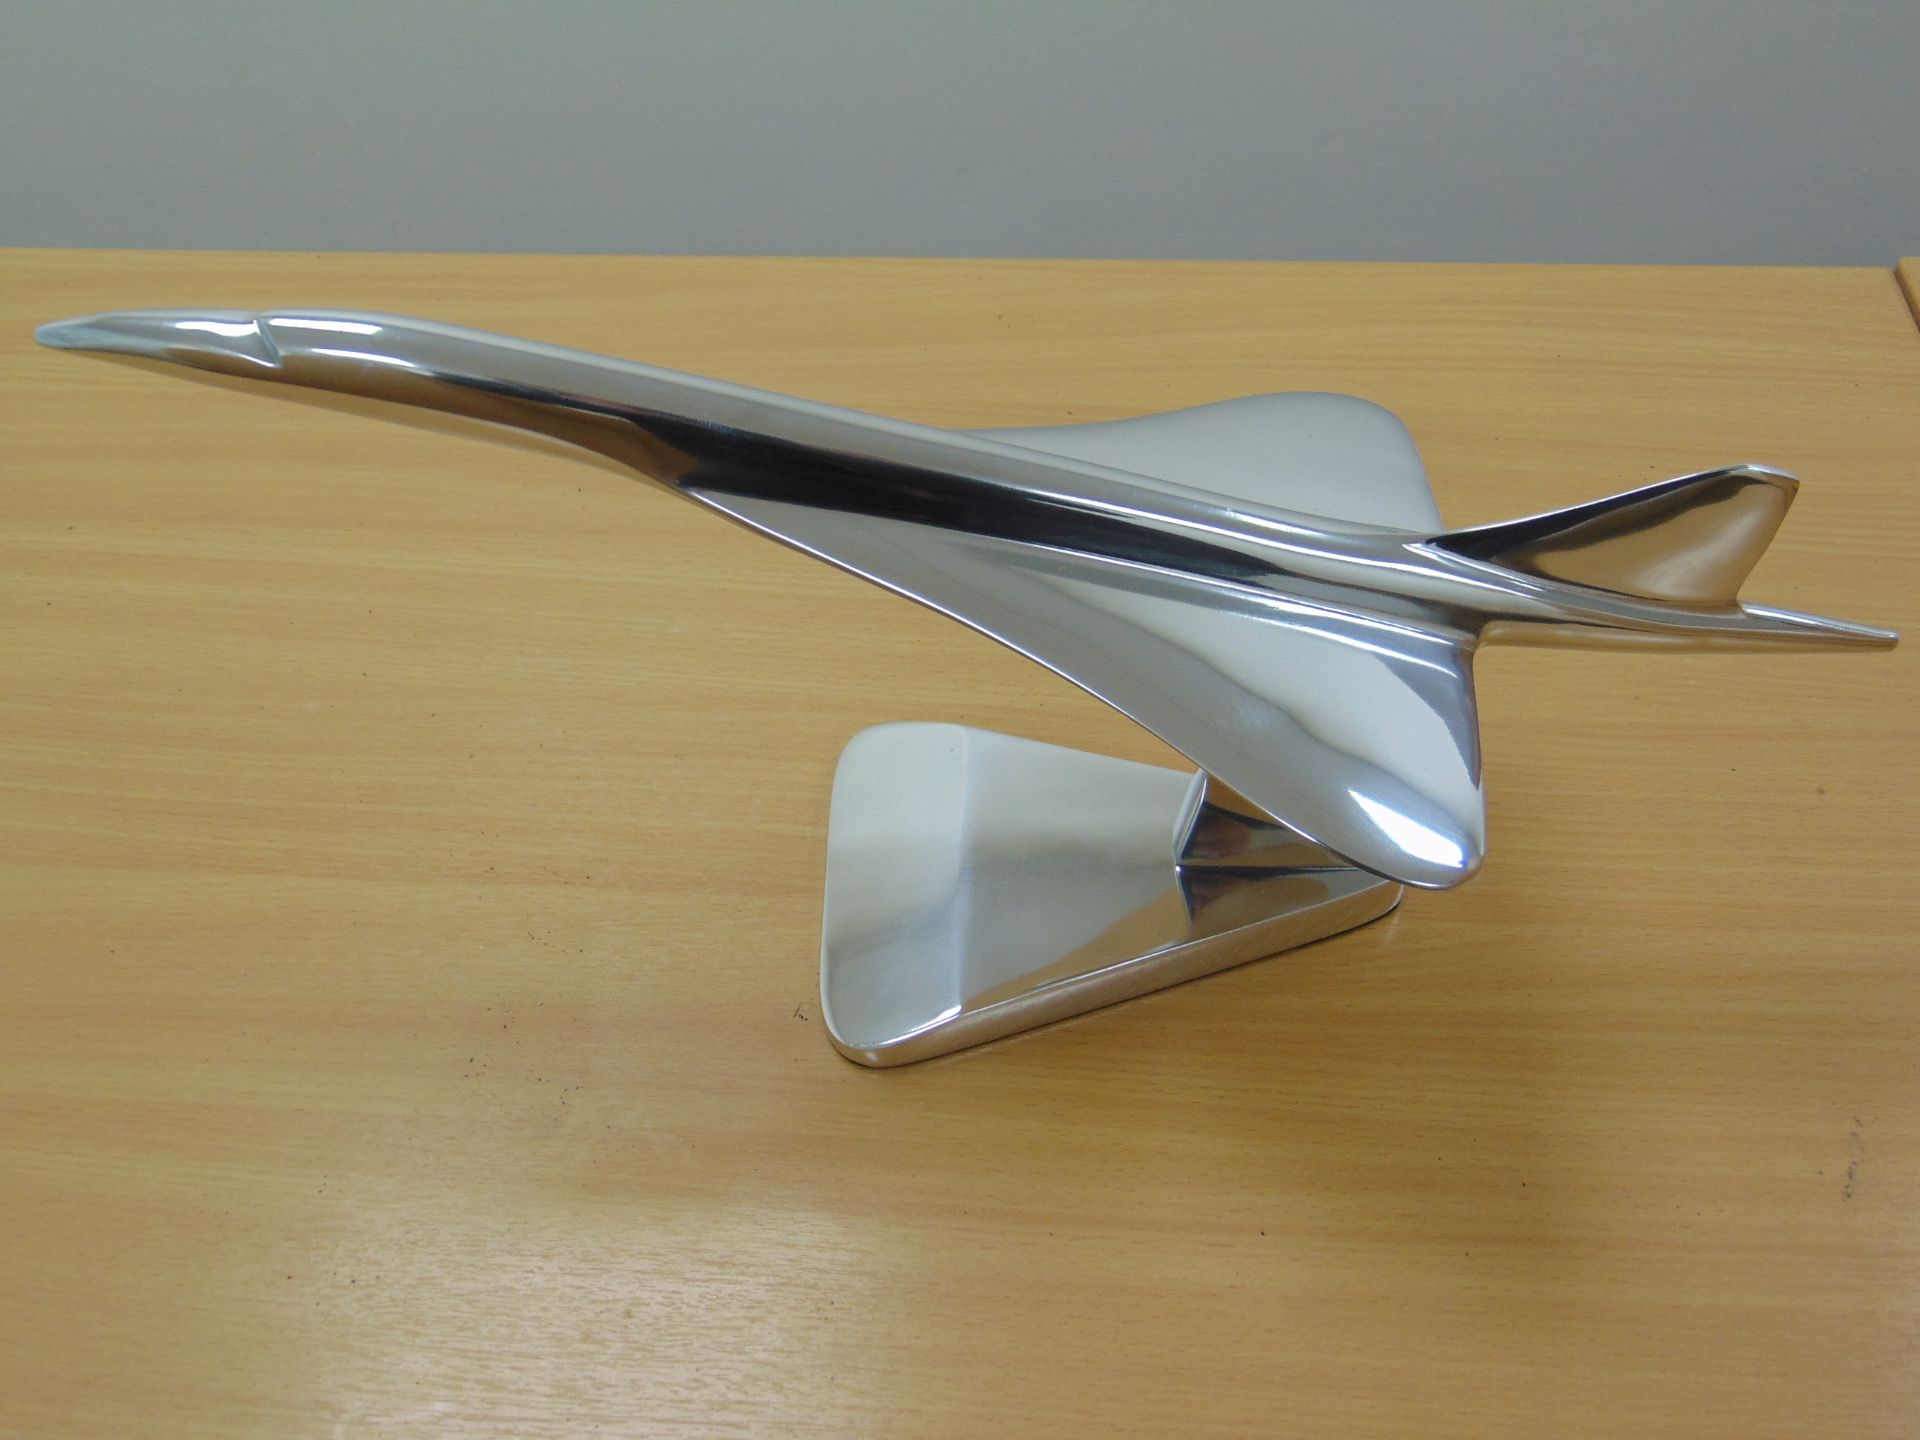 STUNNING POLISHED ALLUMINUM DESK TOP MODEL OF A CONCORD IN FLIGHT ON STAND - Image 9 of 12